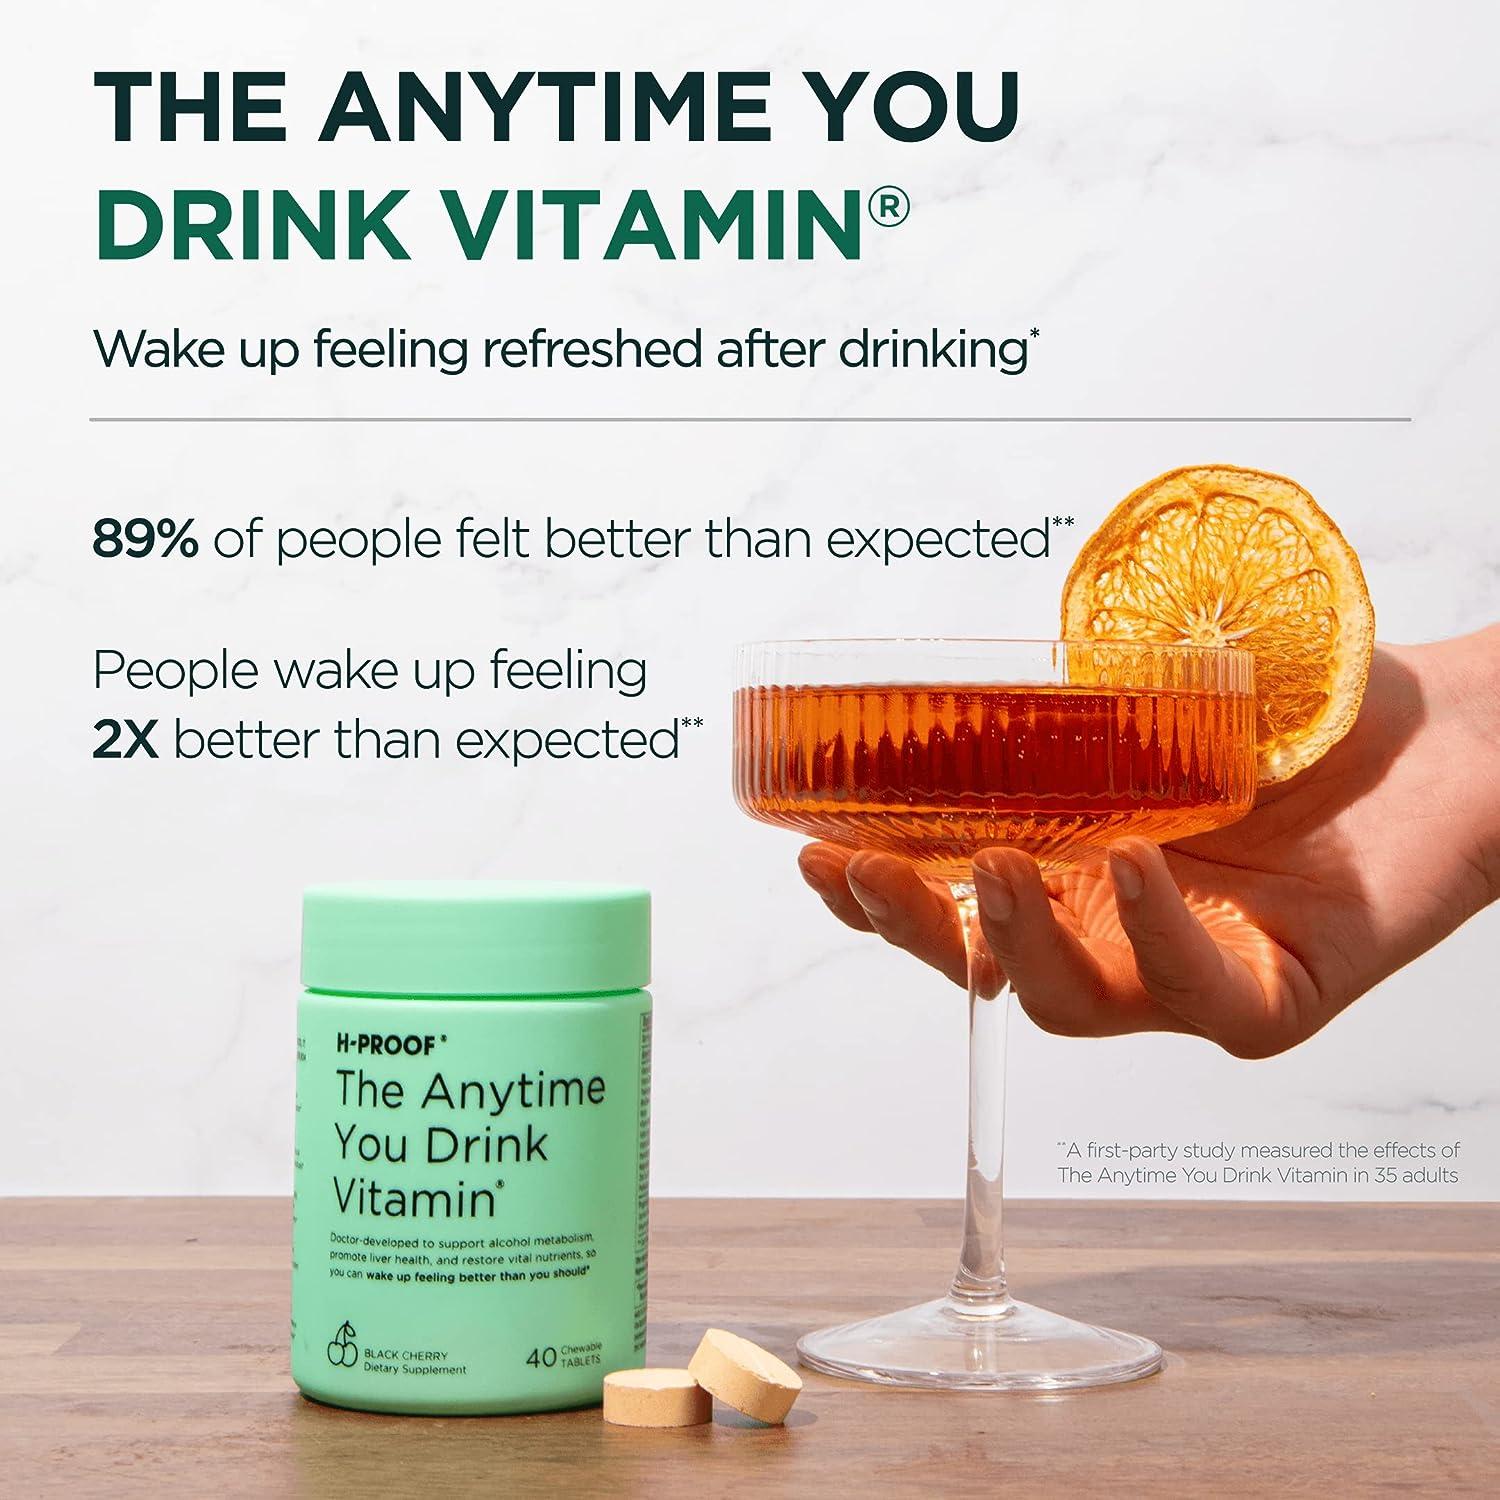 Health tonic drinks & vitamin supplements, Products